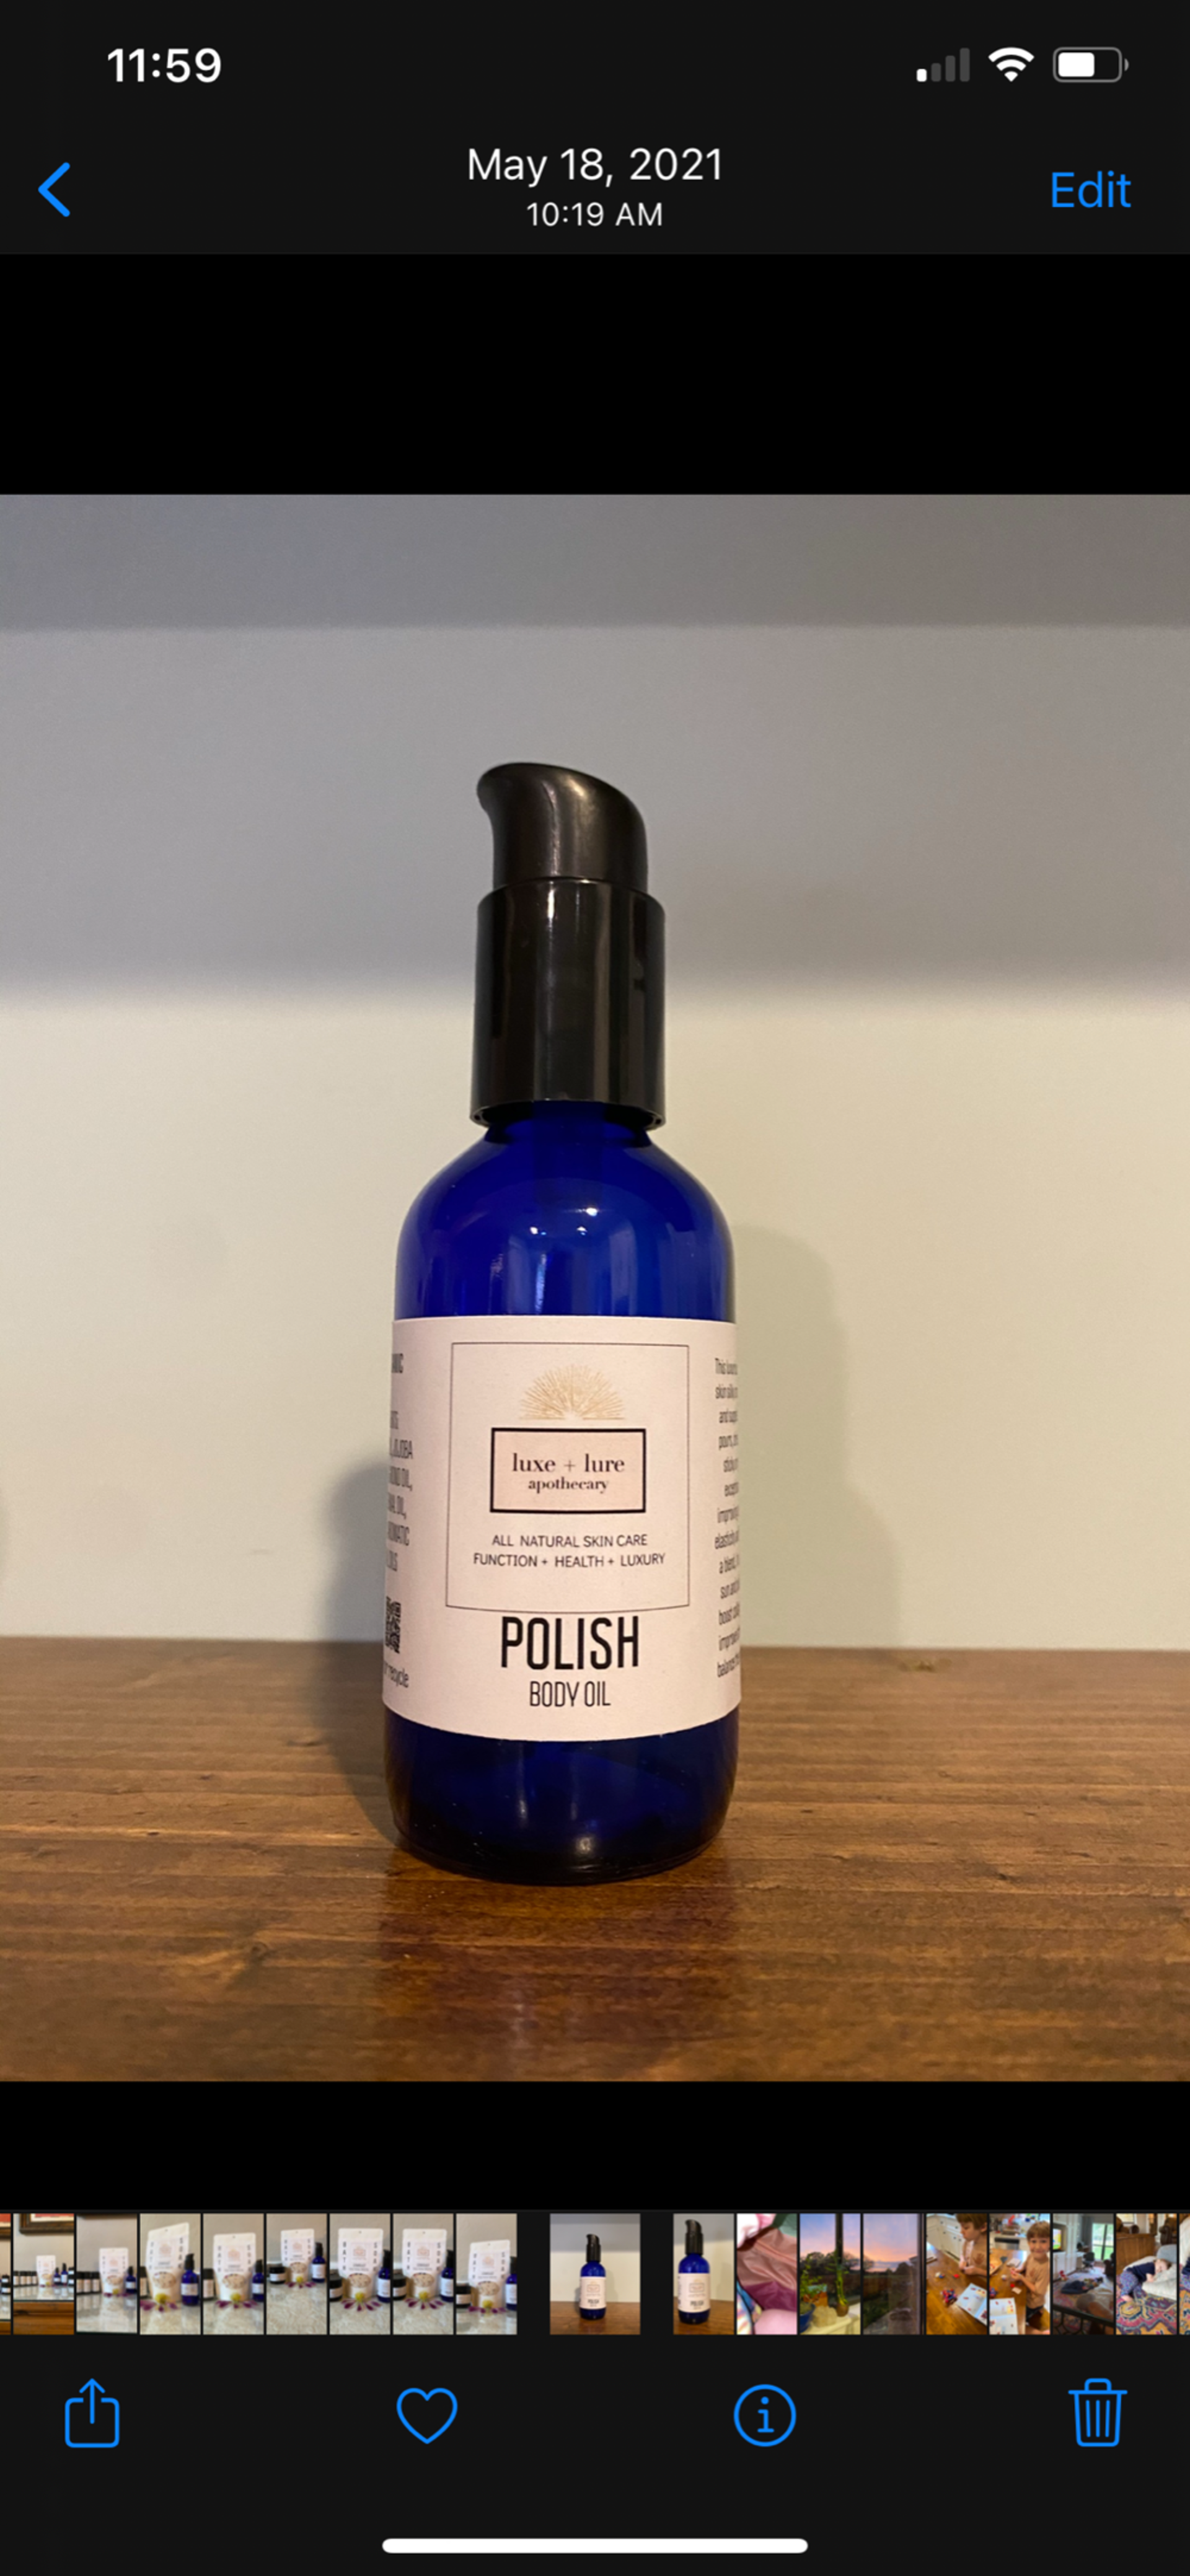 Polish Body Oil by Luxe + Lure Apothecary